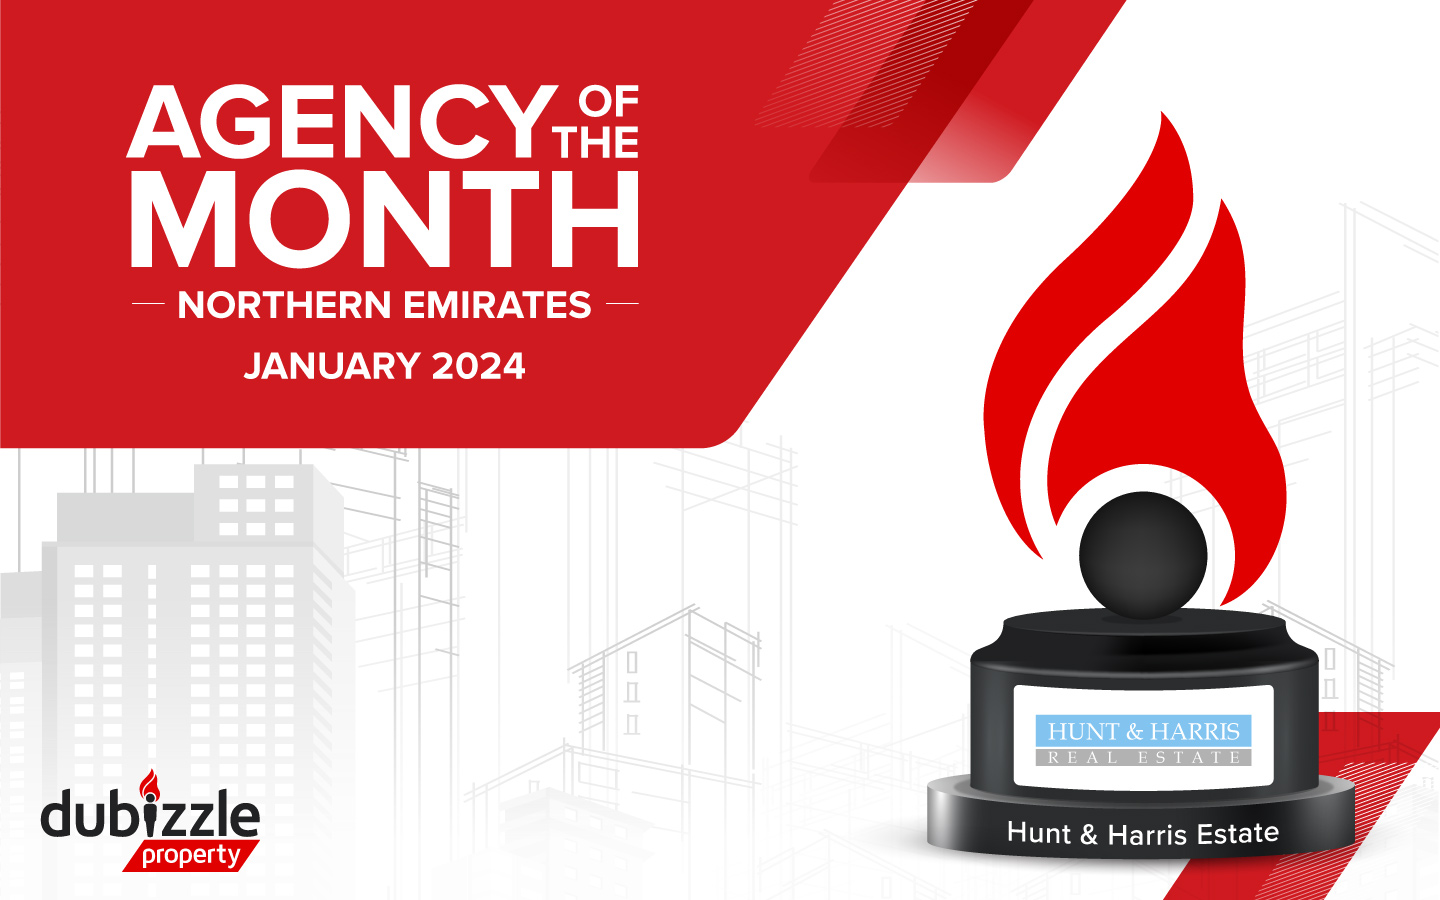 Agency of the Month From Northern Emirates for January 2024